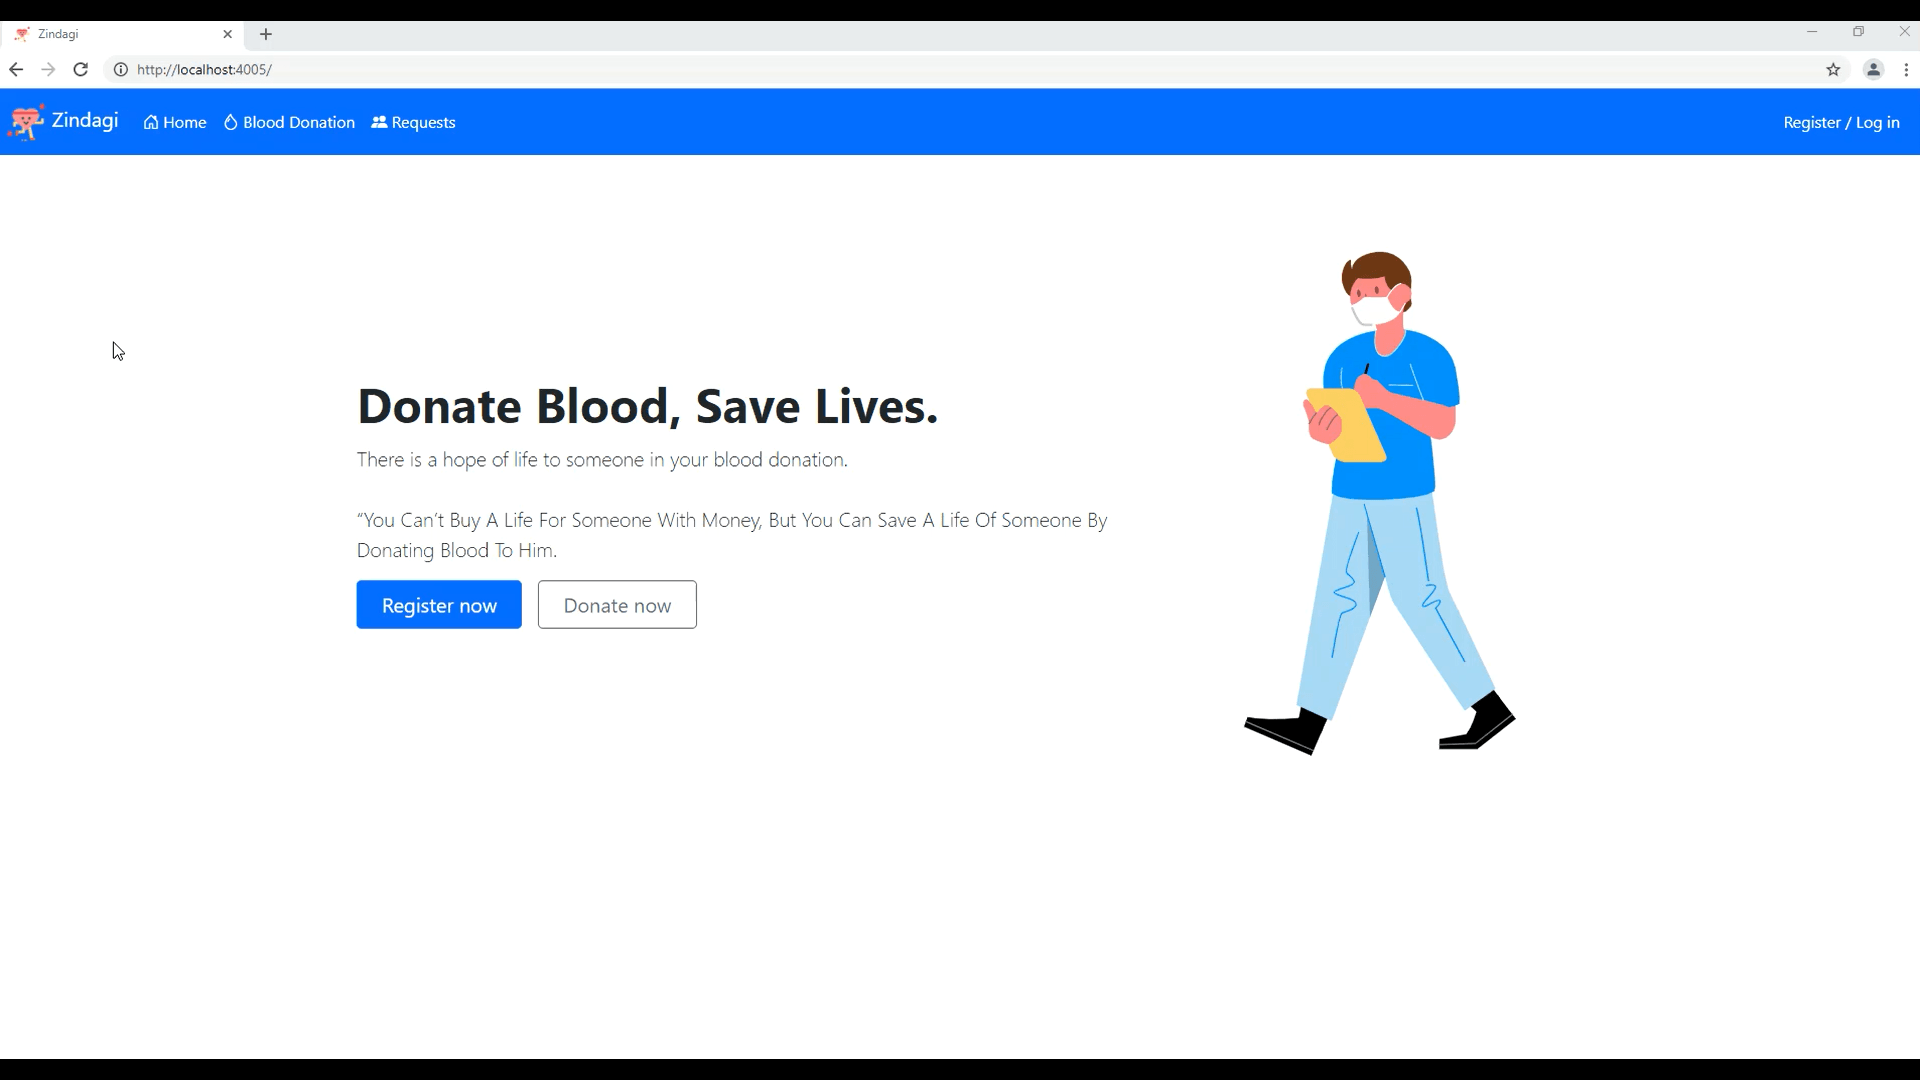 Zindagi homepage says, 'Donate Blood, Save Lives.' and has buttons for Register Now and Contact Us